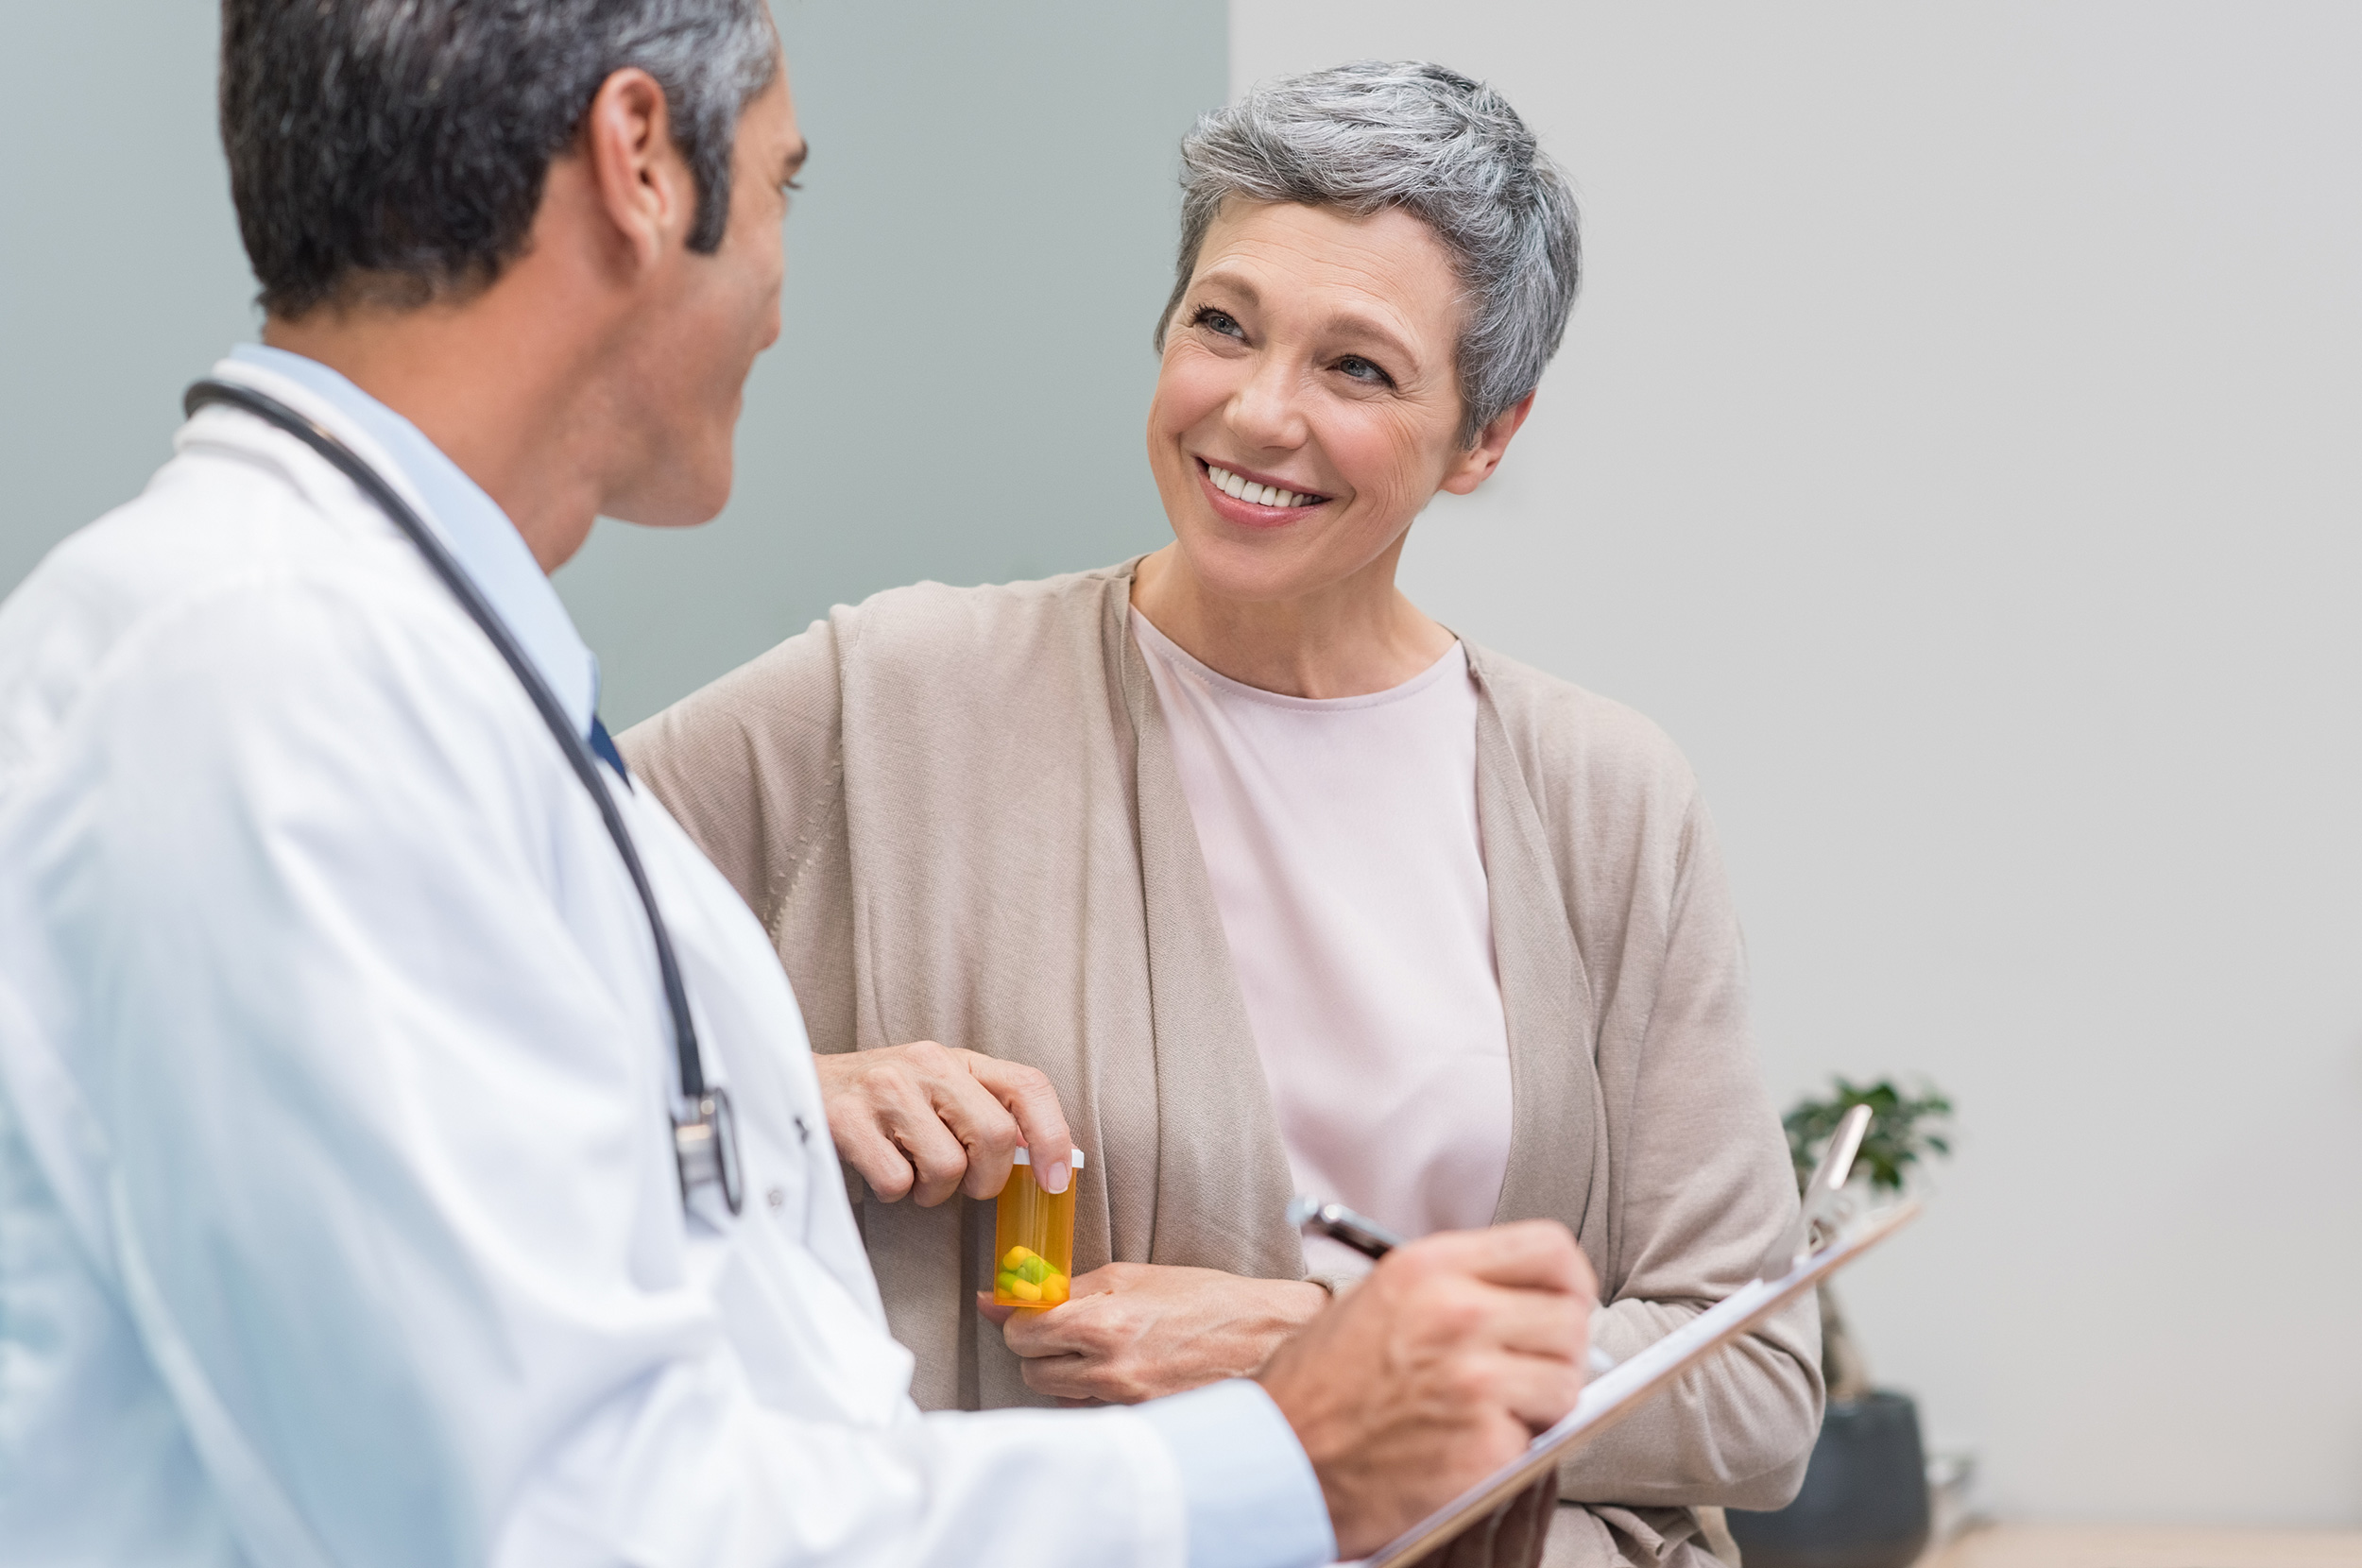 Holding a pill bottle, a woman sits next to a doctor with a clipboard and smiles at him. You need certain forms of evidence and information to qualify for disability benefits.